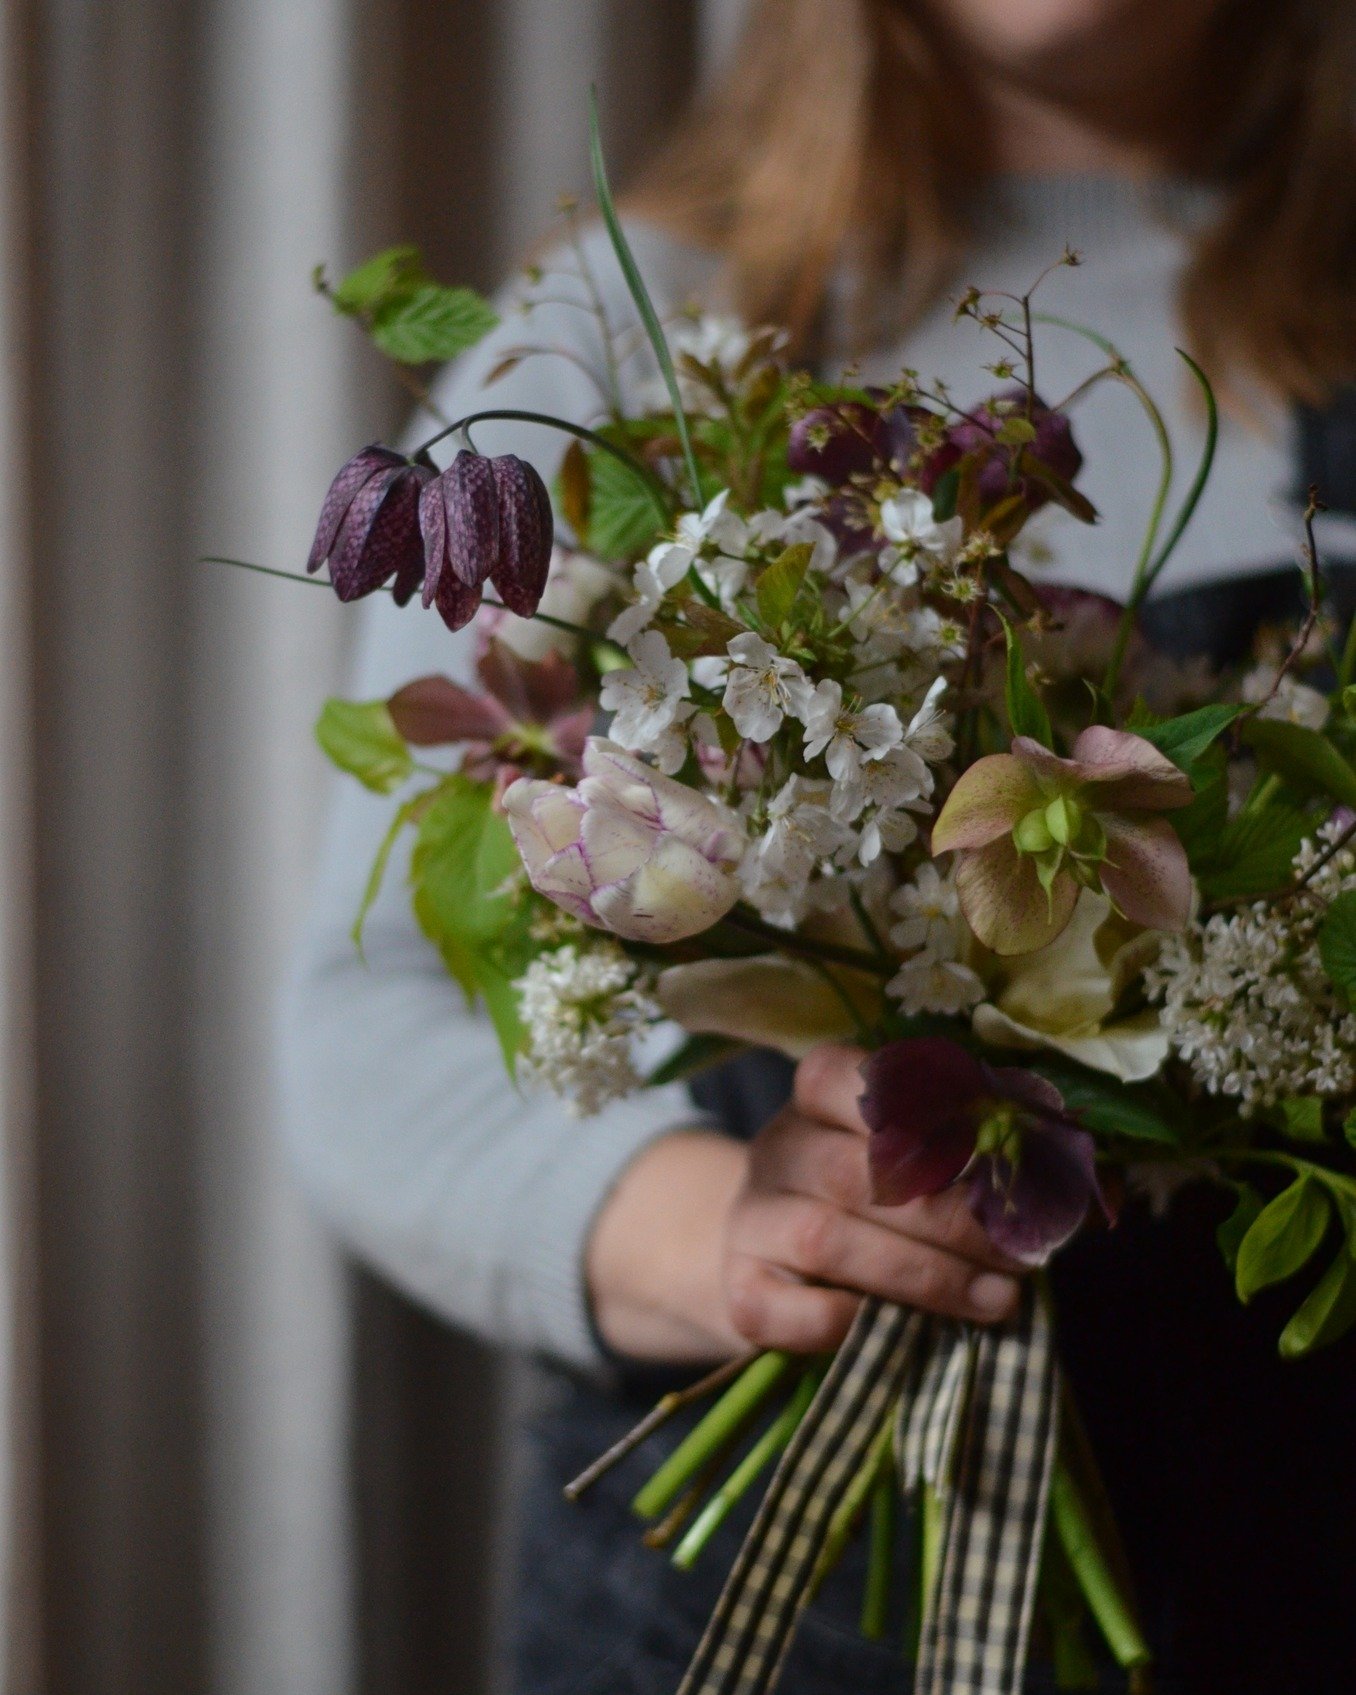 And just like that the fritillaria are over. Our early spring flowers are fading and the ranunculus are just getting into their stride. 

#springflowers #aprilflowers #springbouquet #britishflowers #hampshireflorist #seasonalilty #weddingflowers